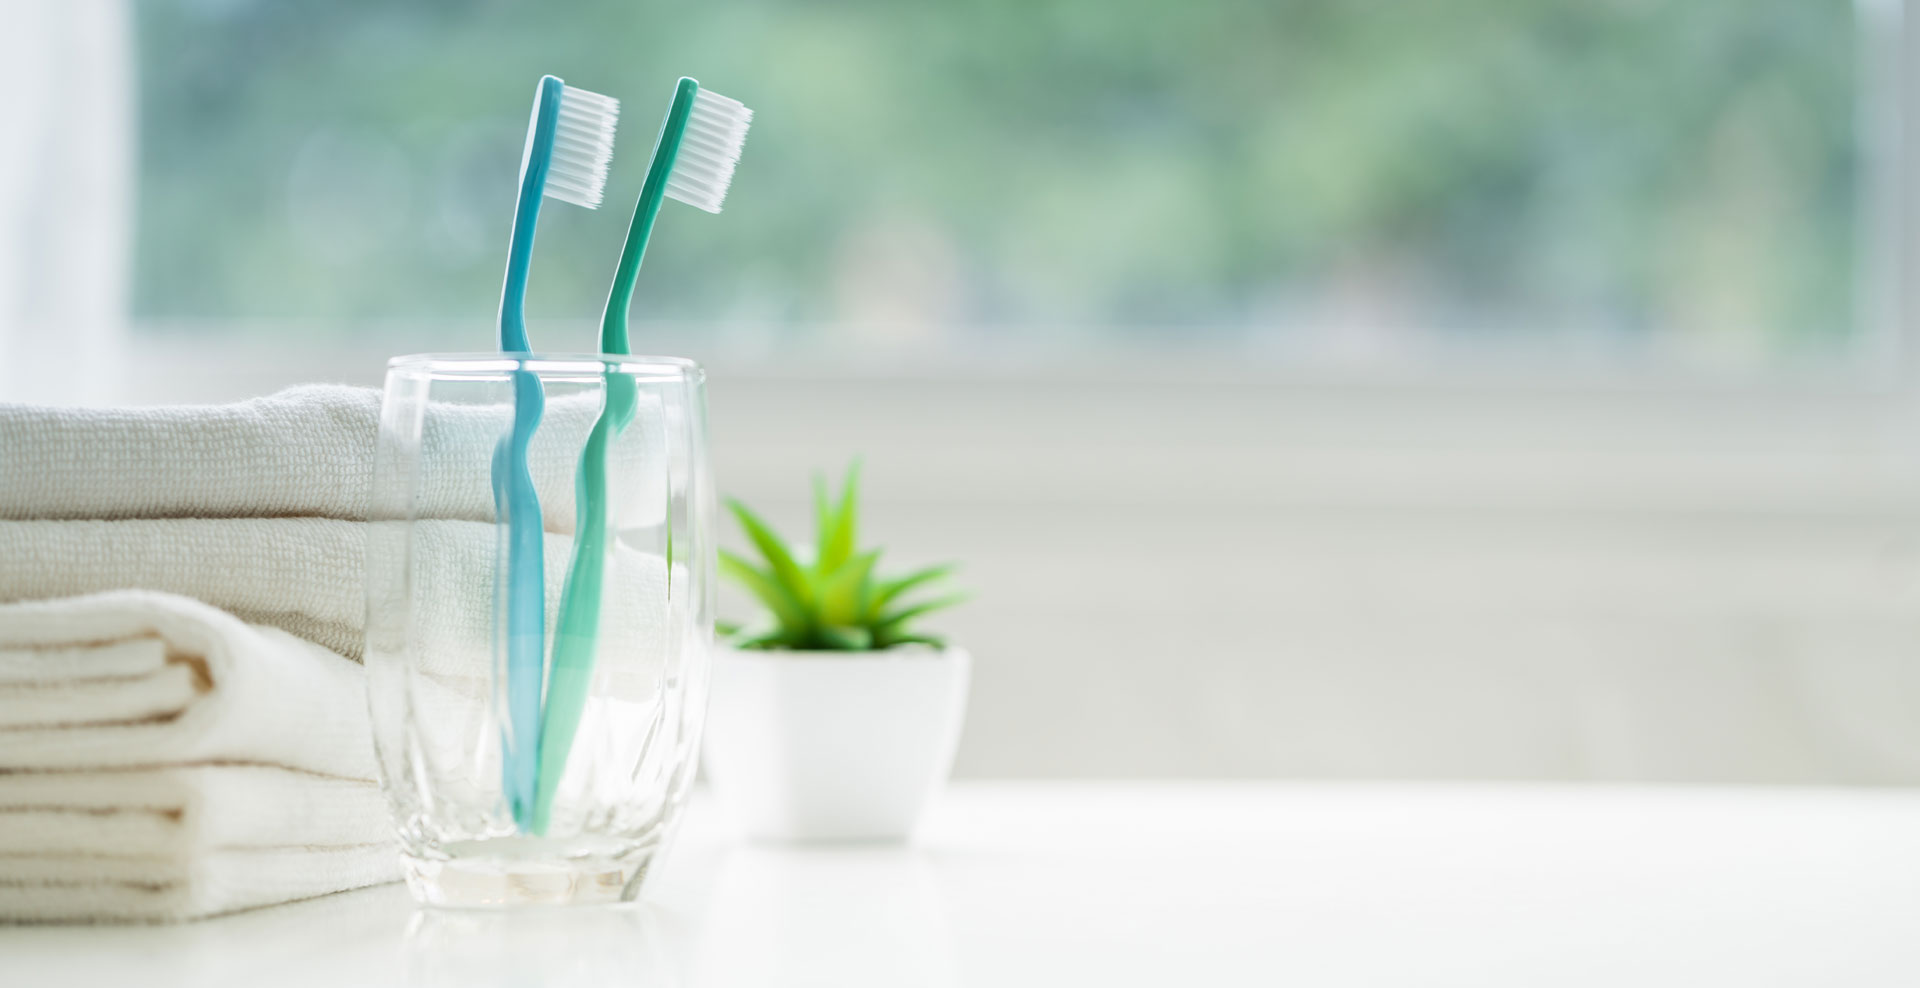 Two toothbrushes in a glass cup with white bath towels and a succulent in a white pot on a counter